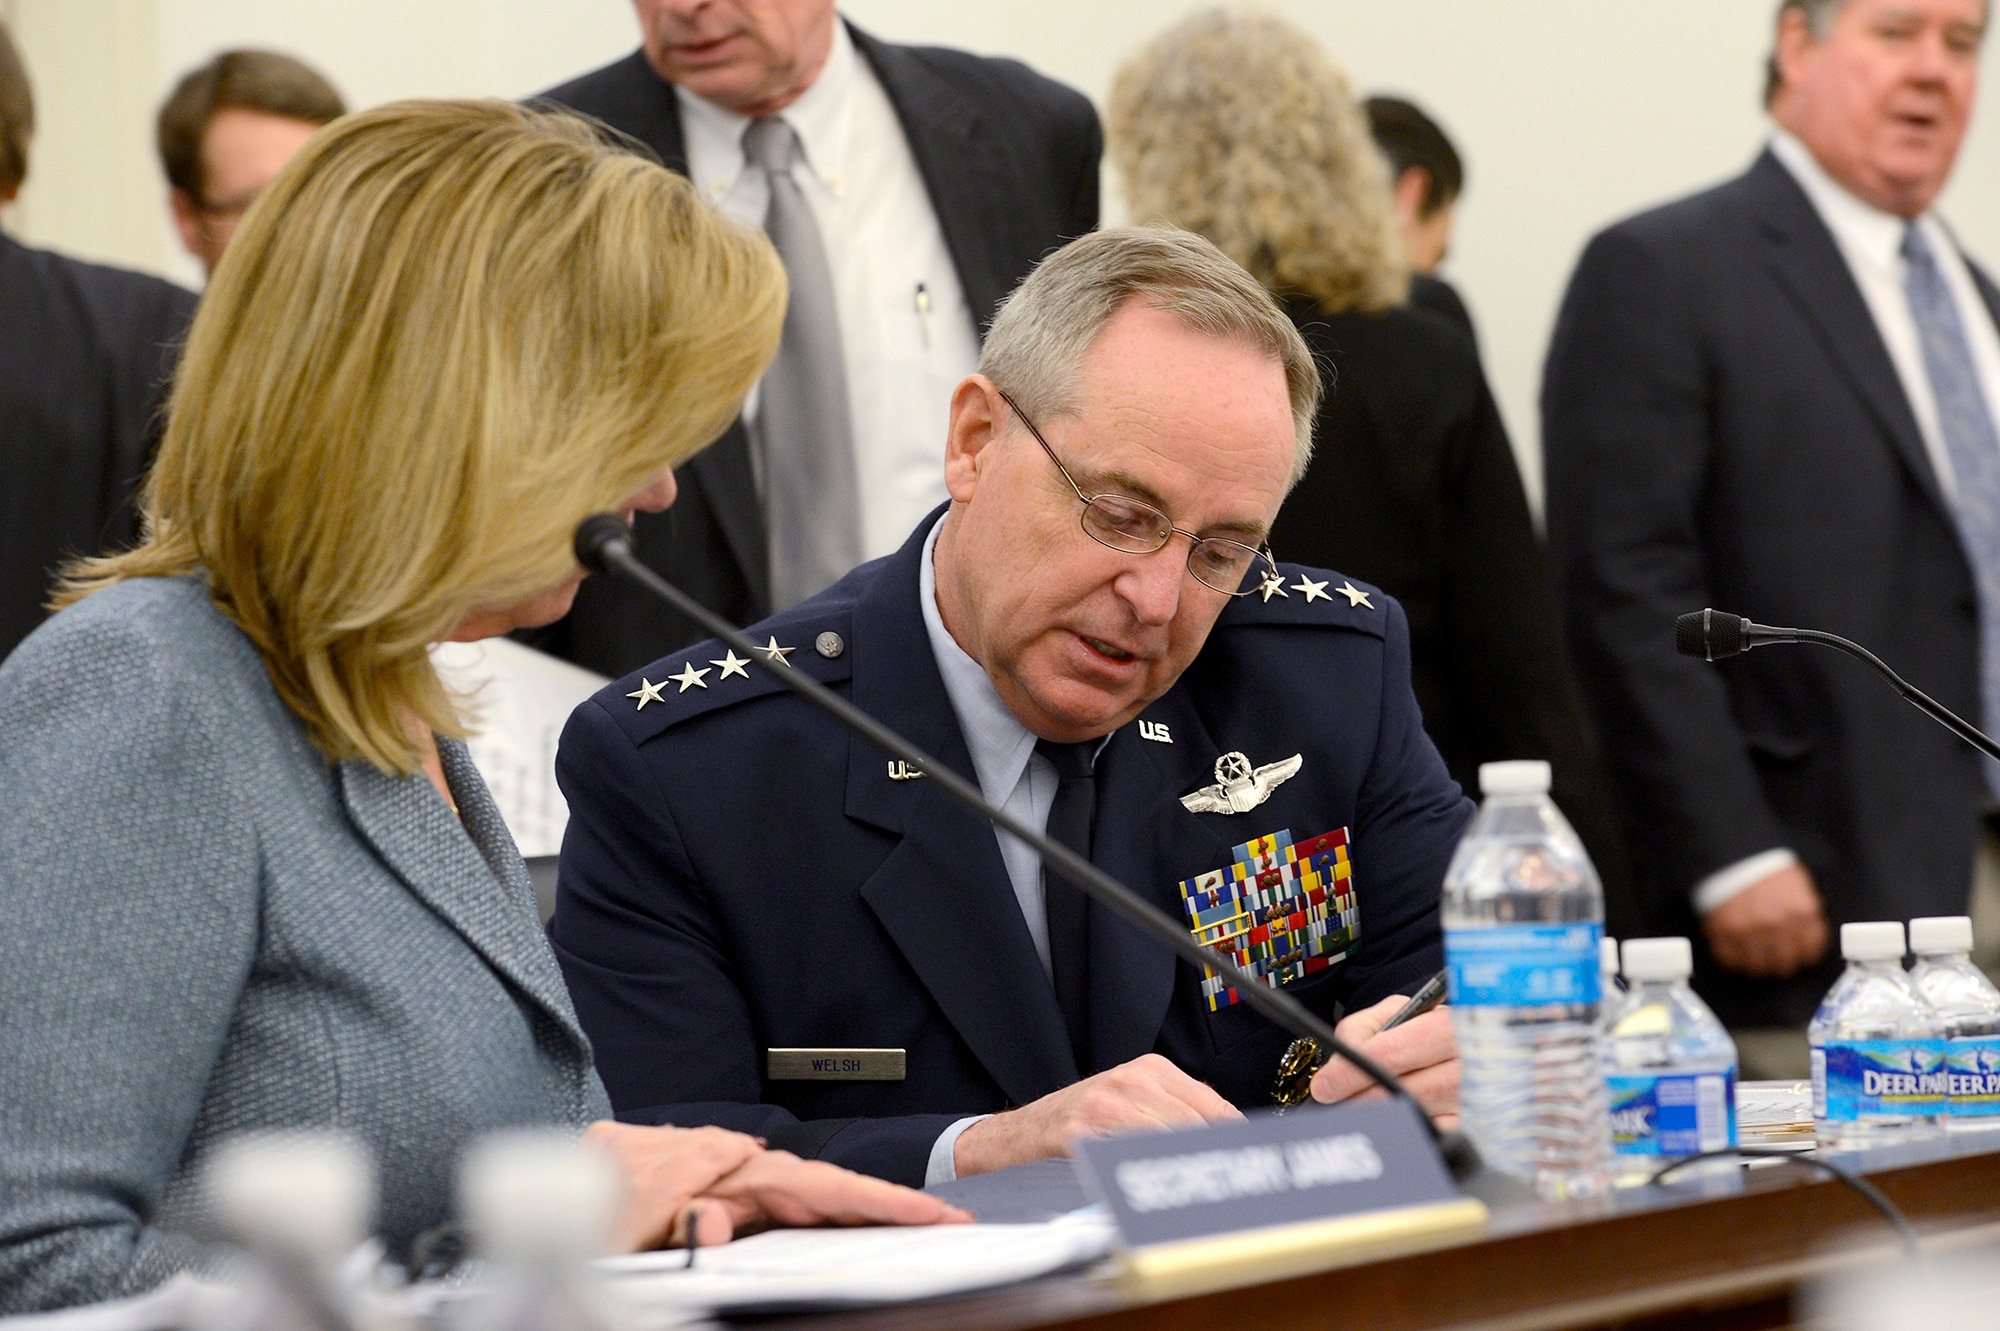 Secretary of the Air Force Deborah Lee James and Air Force Chief of Staff Gen. Mark A. Welsh III testify before the House of Representatives Committee on Appropriations’ Defense Subcommittee, Feb. 27, 2015, in Washington. D.C. The two leaders met with the House members to discuss the Air Force's Fiscal Year 2016 President's Budget Request. (U.S. Air Force photo/Scott M. Ash)